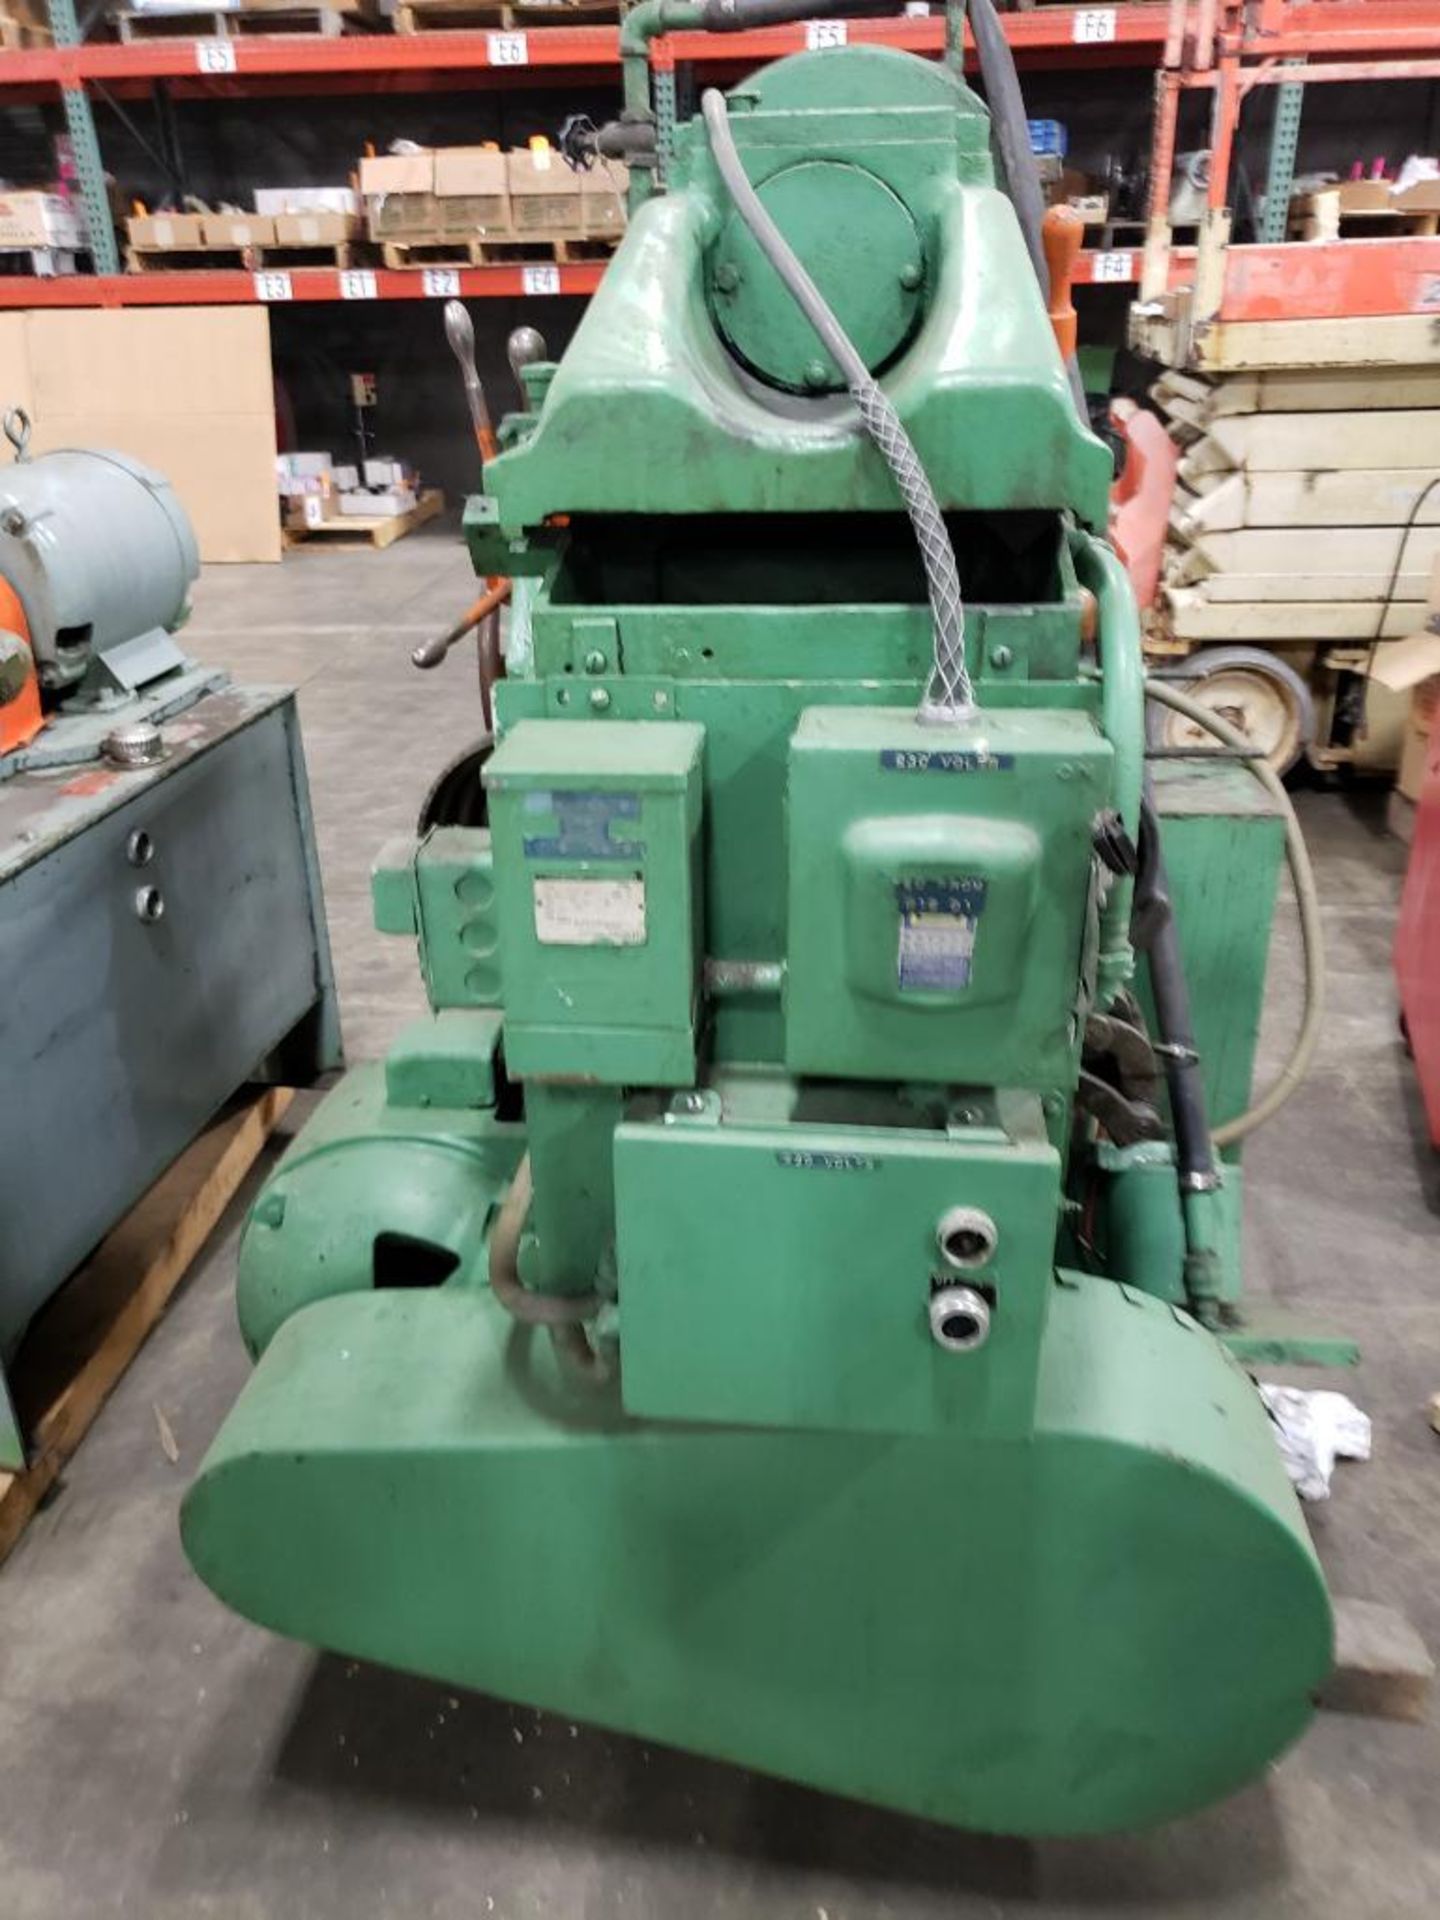 Arter Winding Machine Company A-1-8 horizontal spindle rotary surface grinder, 230V Magnetic Chuck. - Image 15 of 23